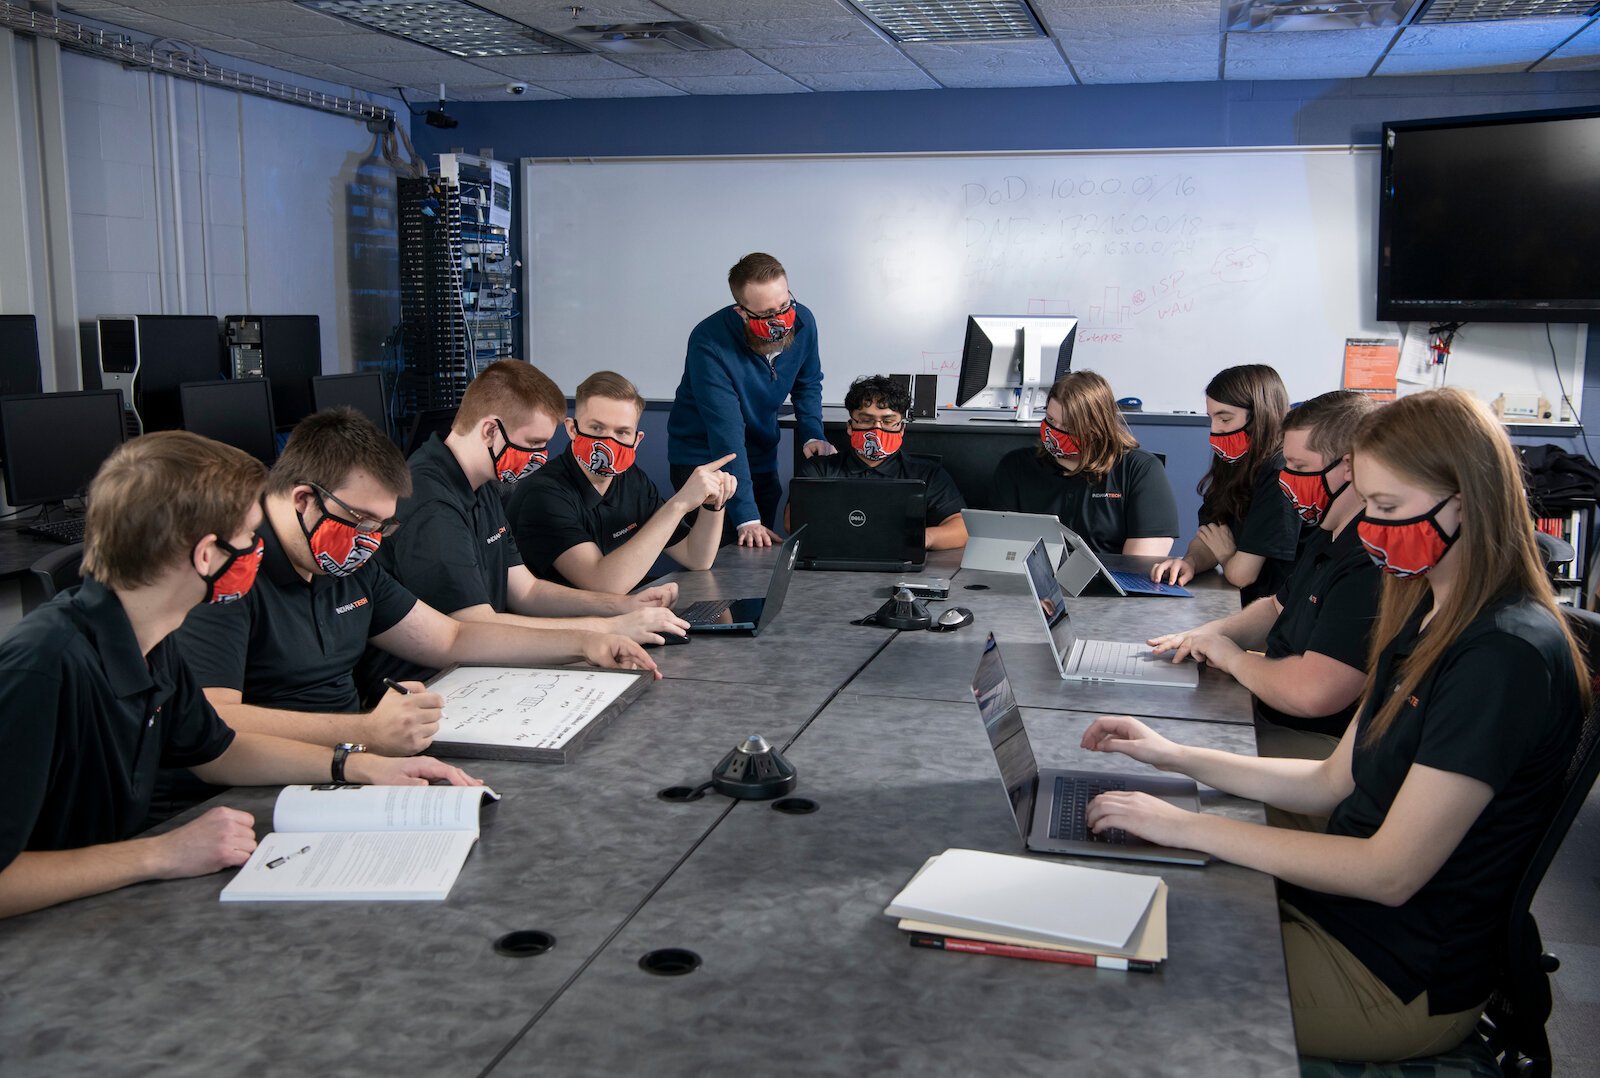 Since 2006, the Indiana Tech Cyber Warriors have grown into an elite collegiate cyber competition team.